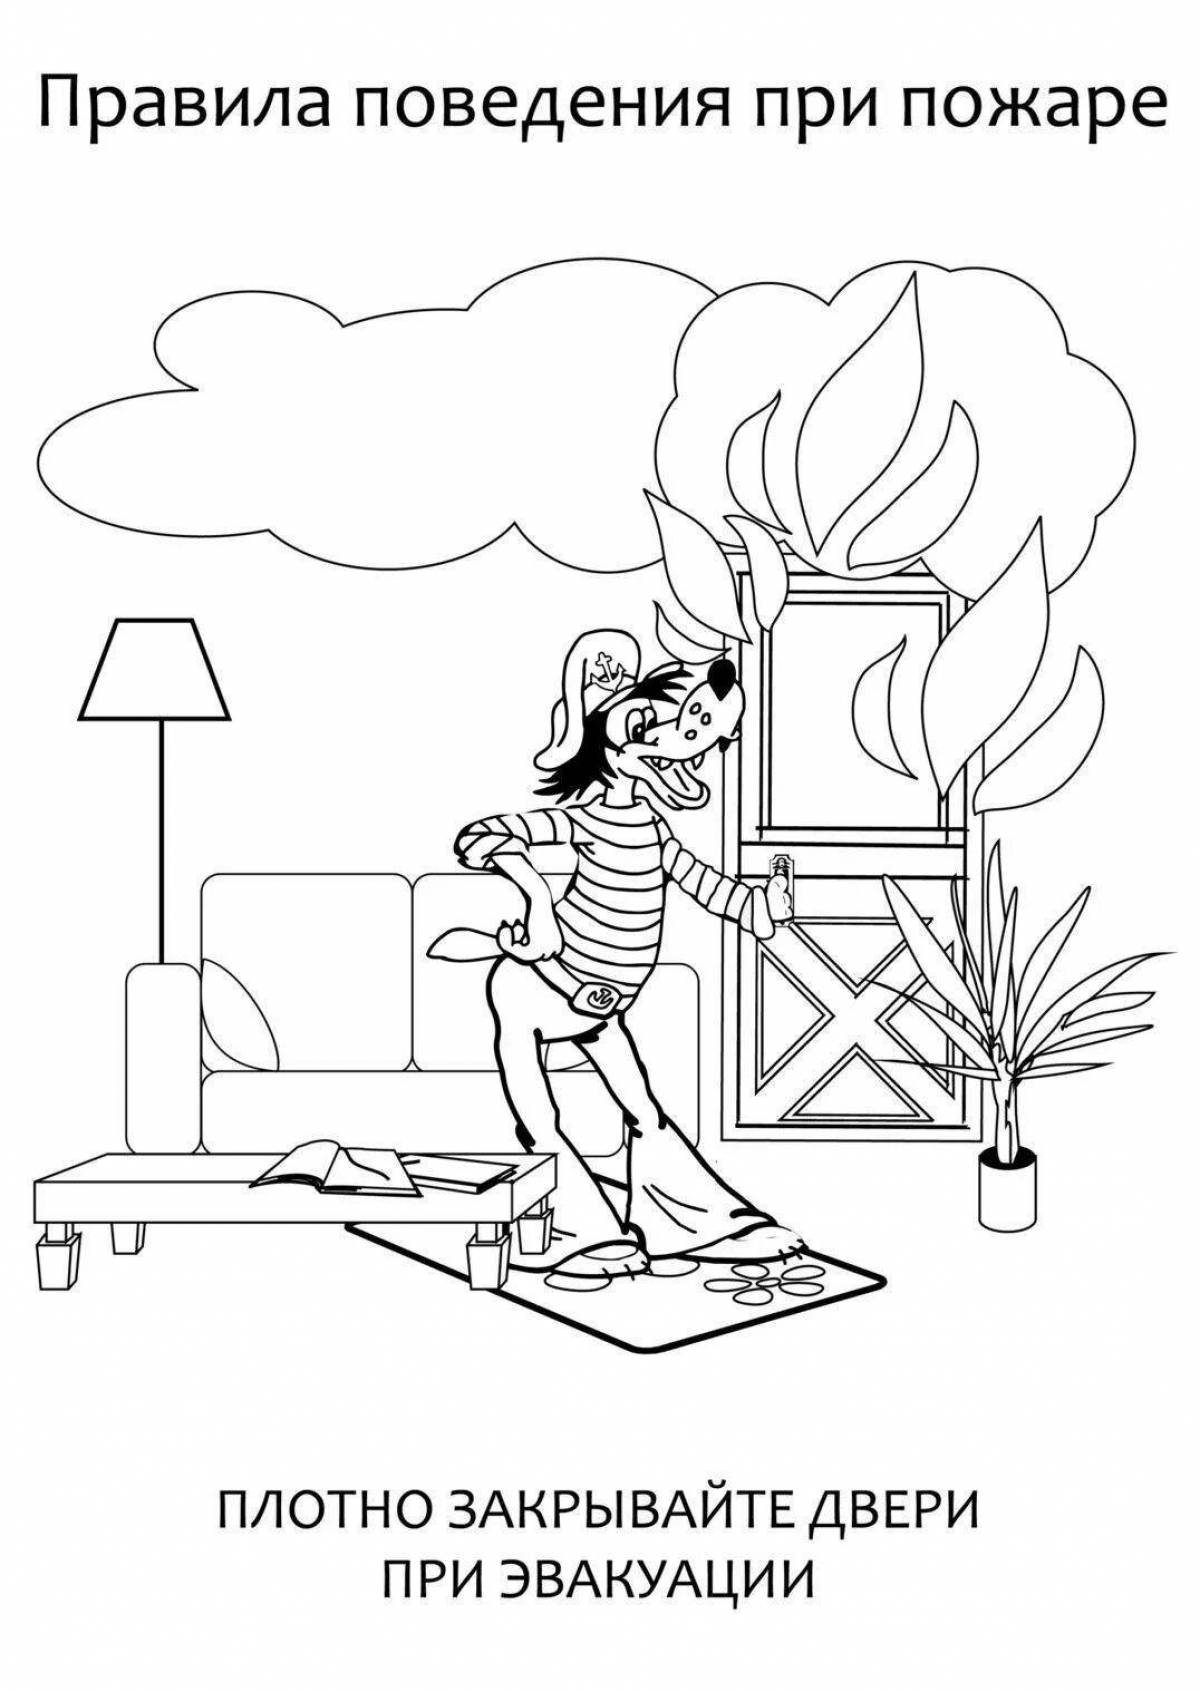 Attractive fire safety tips for kids